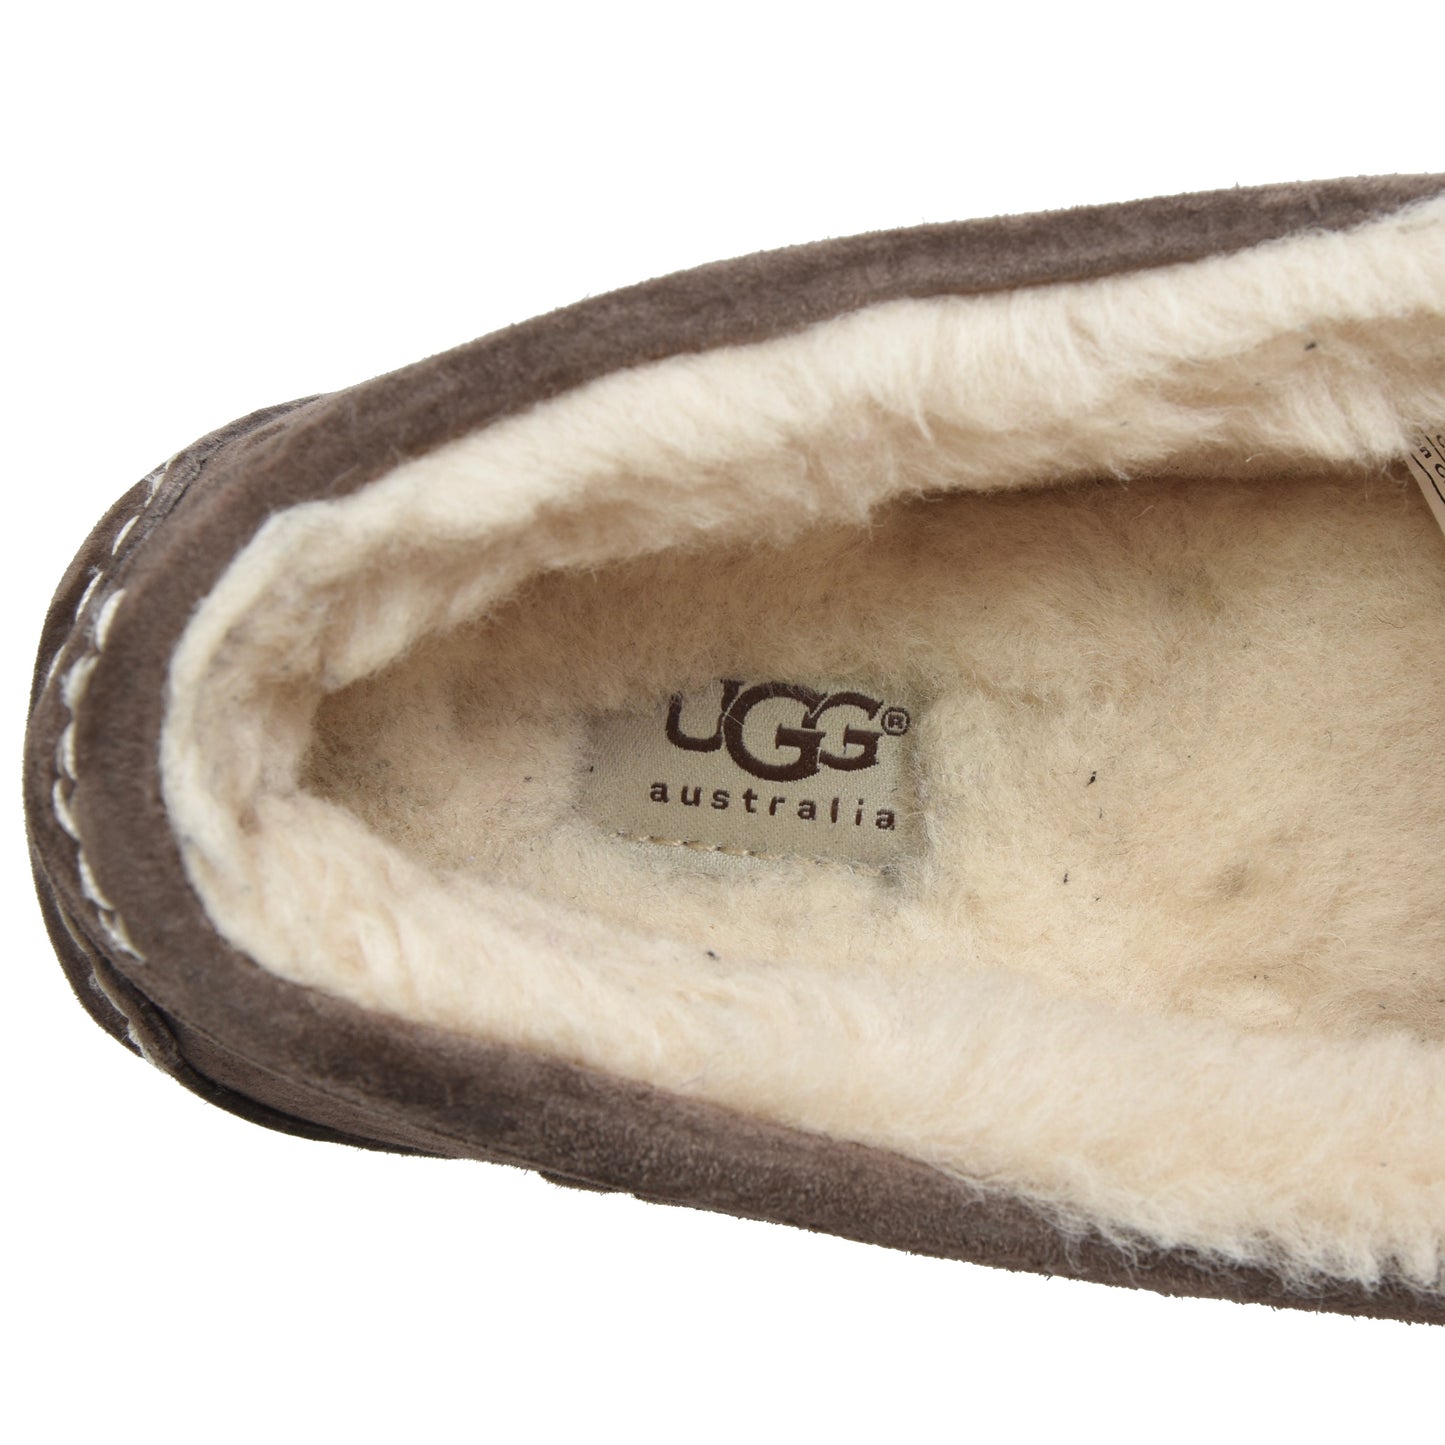 Ugg Australia Shearling Slippers Size 41 - Brown